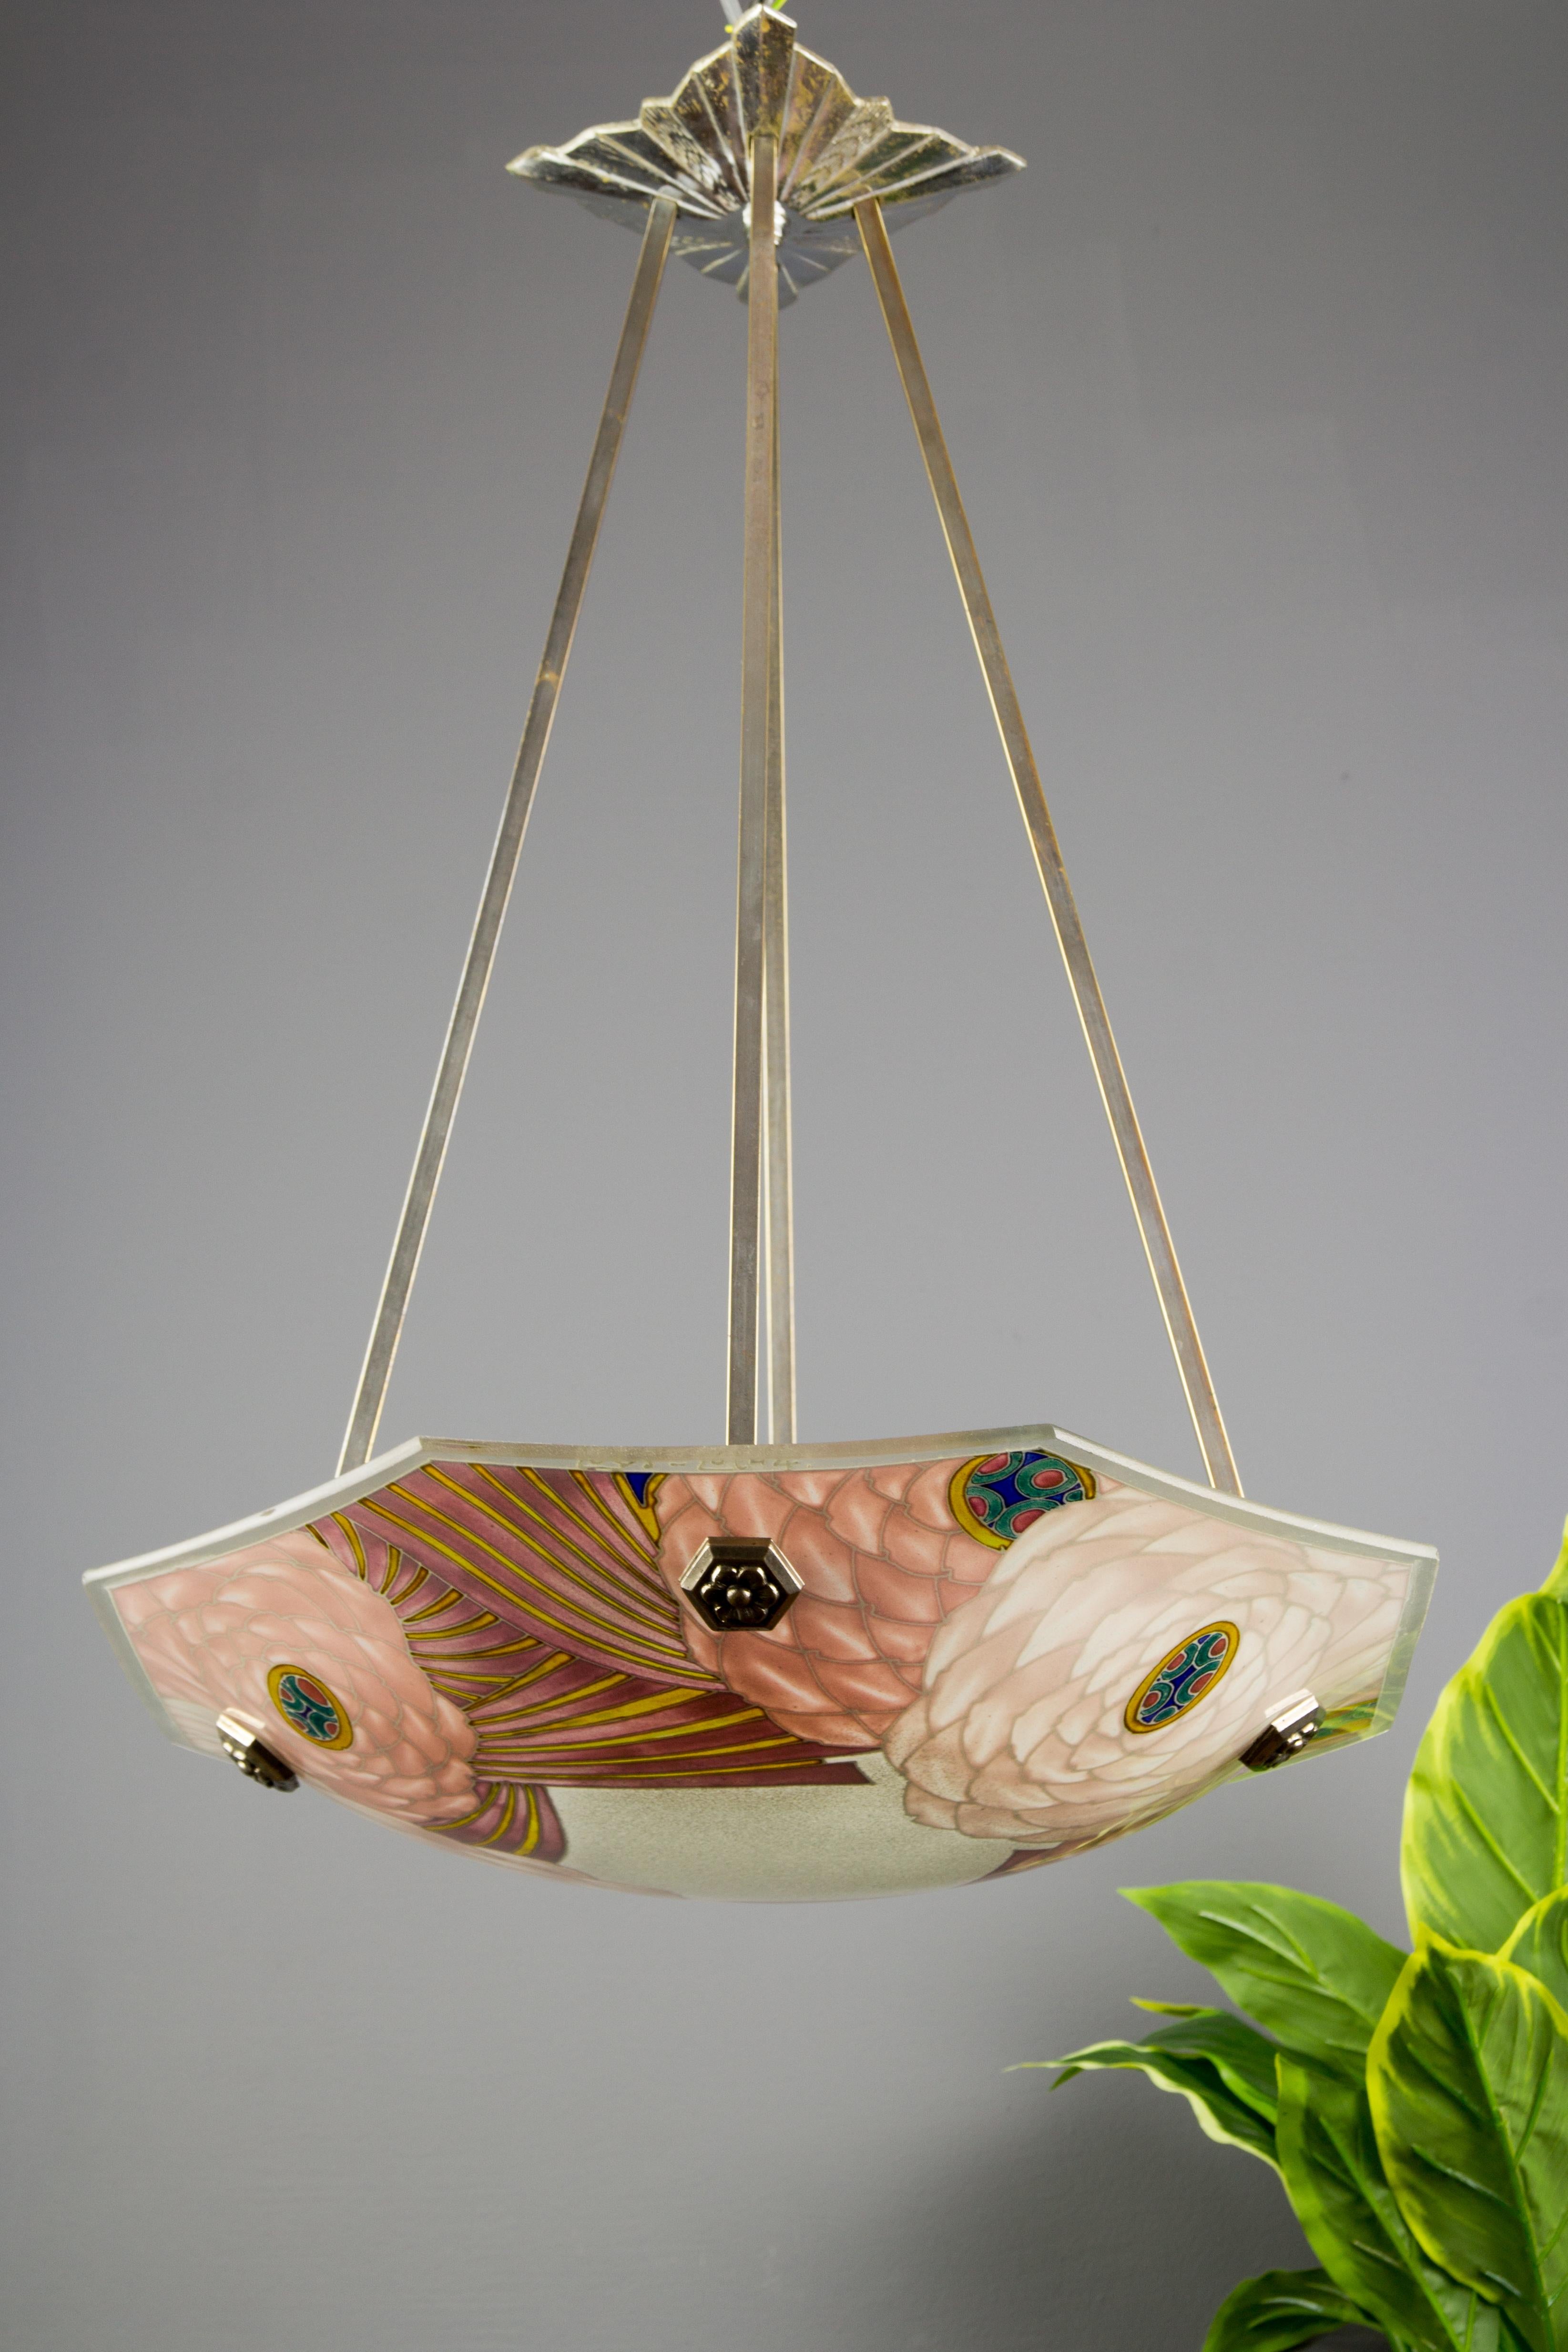 This superb Art Deco molded, frosted and hand painted hexagonal glass bowl features floral design in soft pastels that looks wonderful both lit and unlit. Outer edge is signed “Loys Lucha” by Les Verreries d'Art de Loys Lucha. The colorful pendant